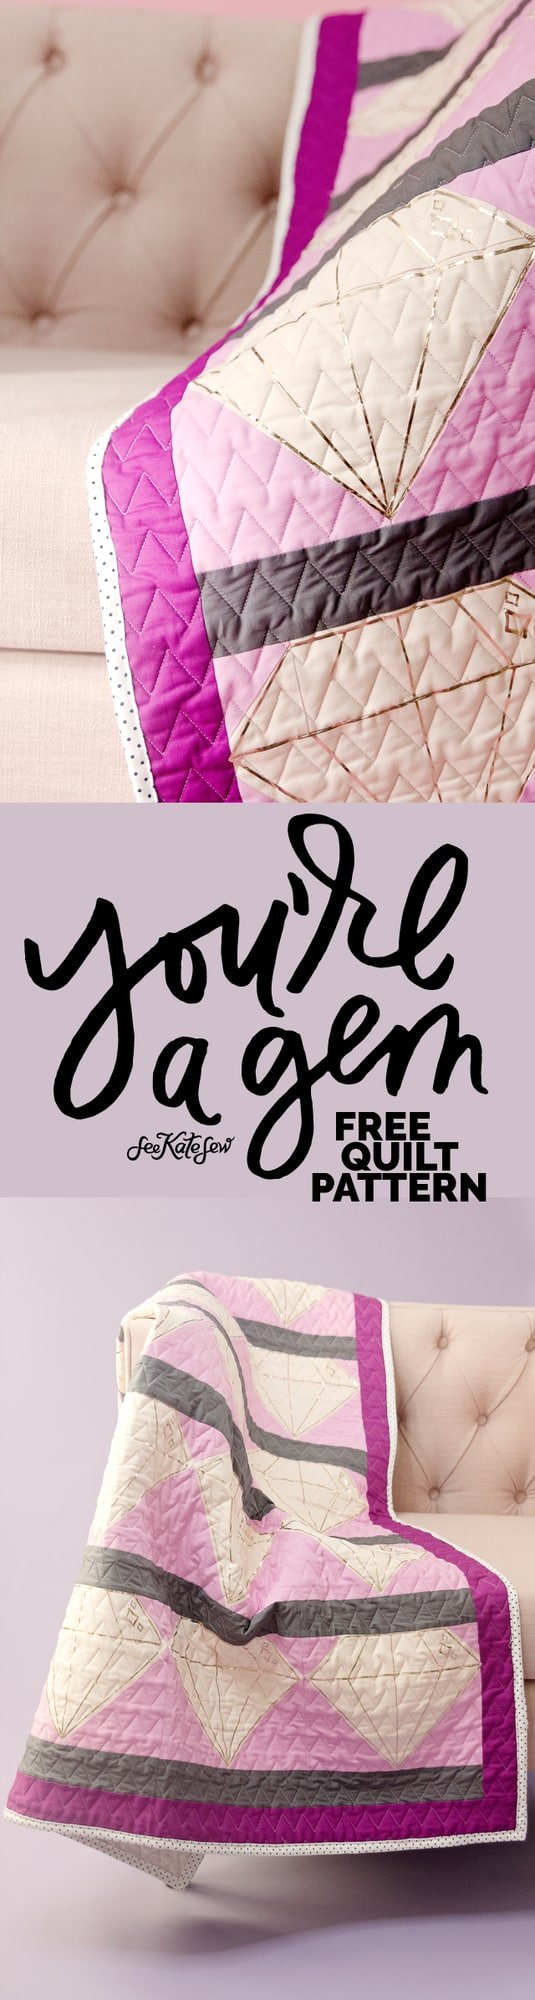 Quilting with the Cricut Maker | Quilt Block of The Month | diy quilt for beginners | free quilt patterns | diy quilt | quilt tutorial | cricut tutorials | how to make a quilt || See Kate Sew #freepattern #quiltpatterns #cricut